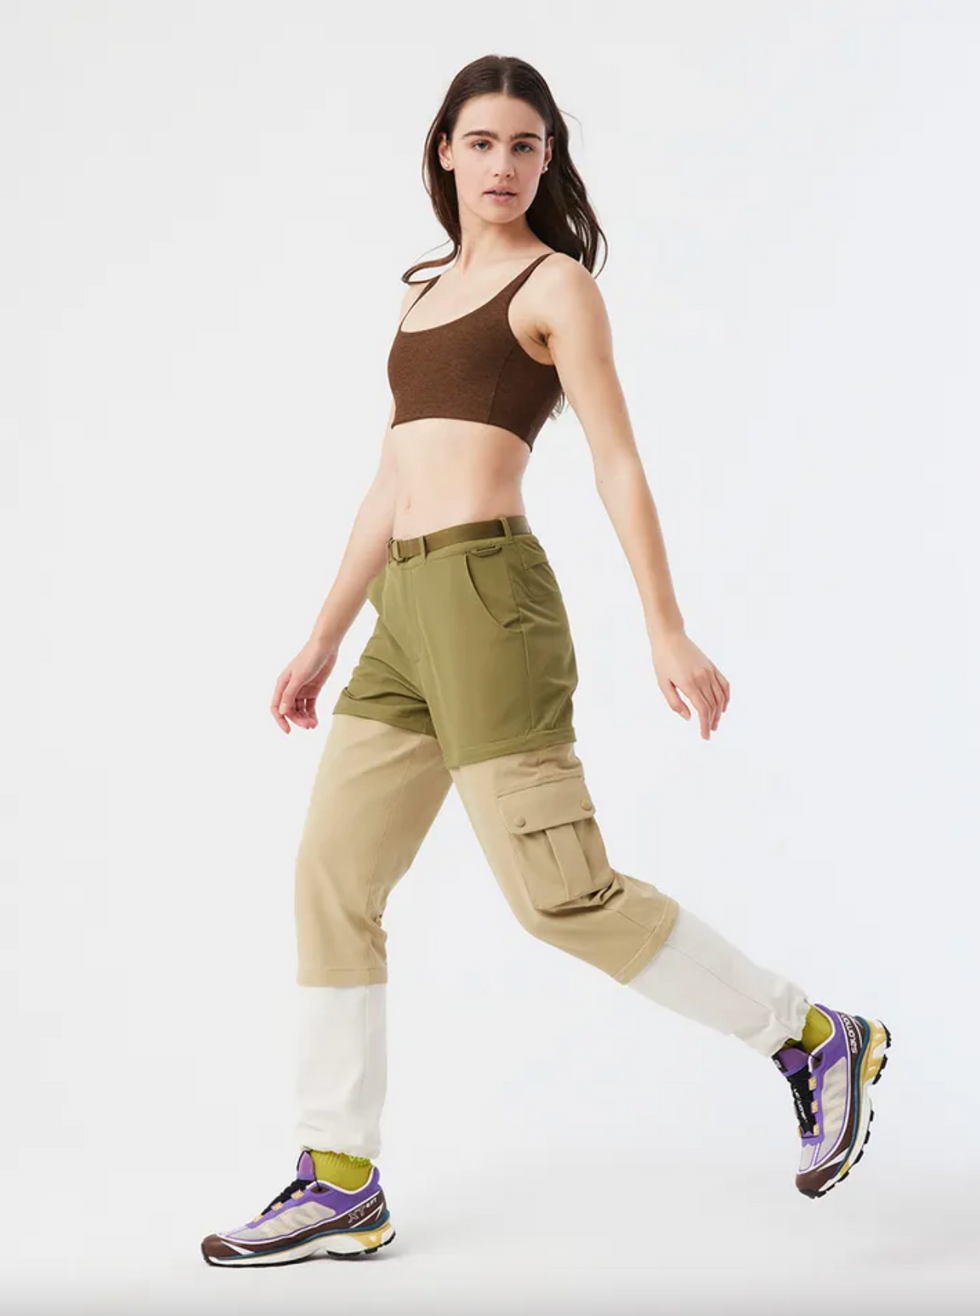 Outdoor Voices RecTrek Zip-Off Pant granola girl outfits for hiking